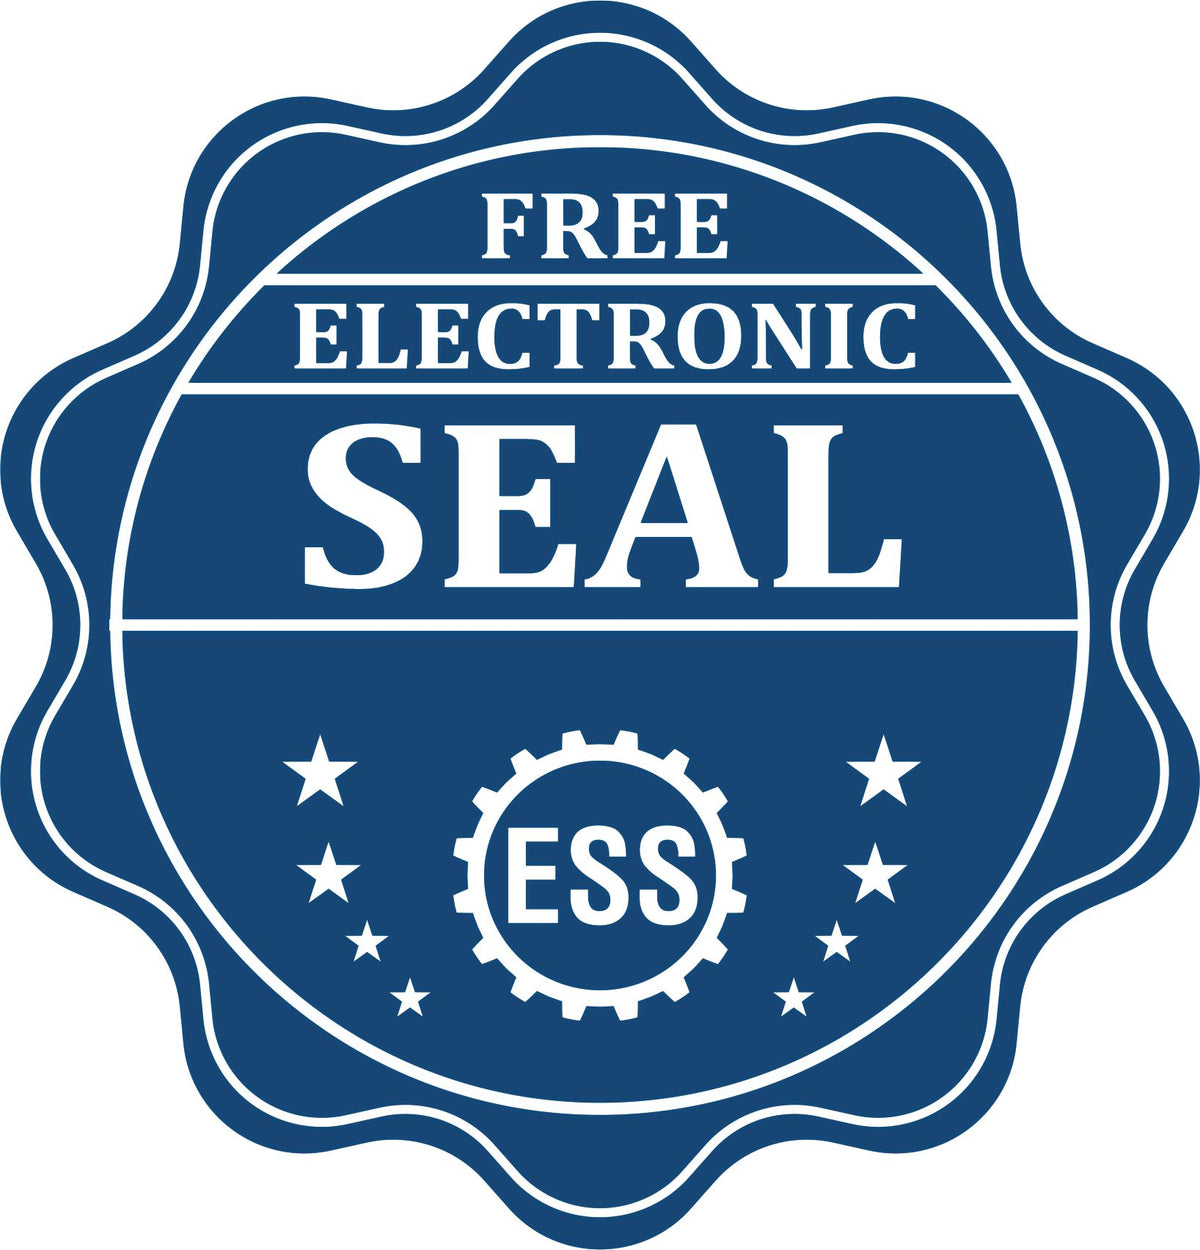 A badge showing a free electronic seal for the Slim Pre-Inked Rectangular Notary Stamp for North Dakota with stars and the ESS gear on the emblem.